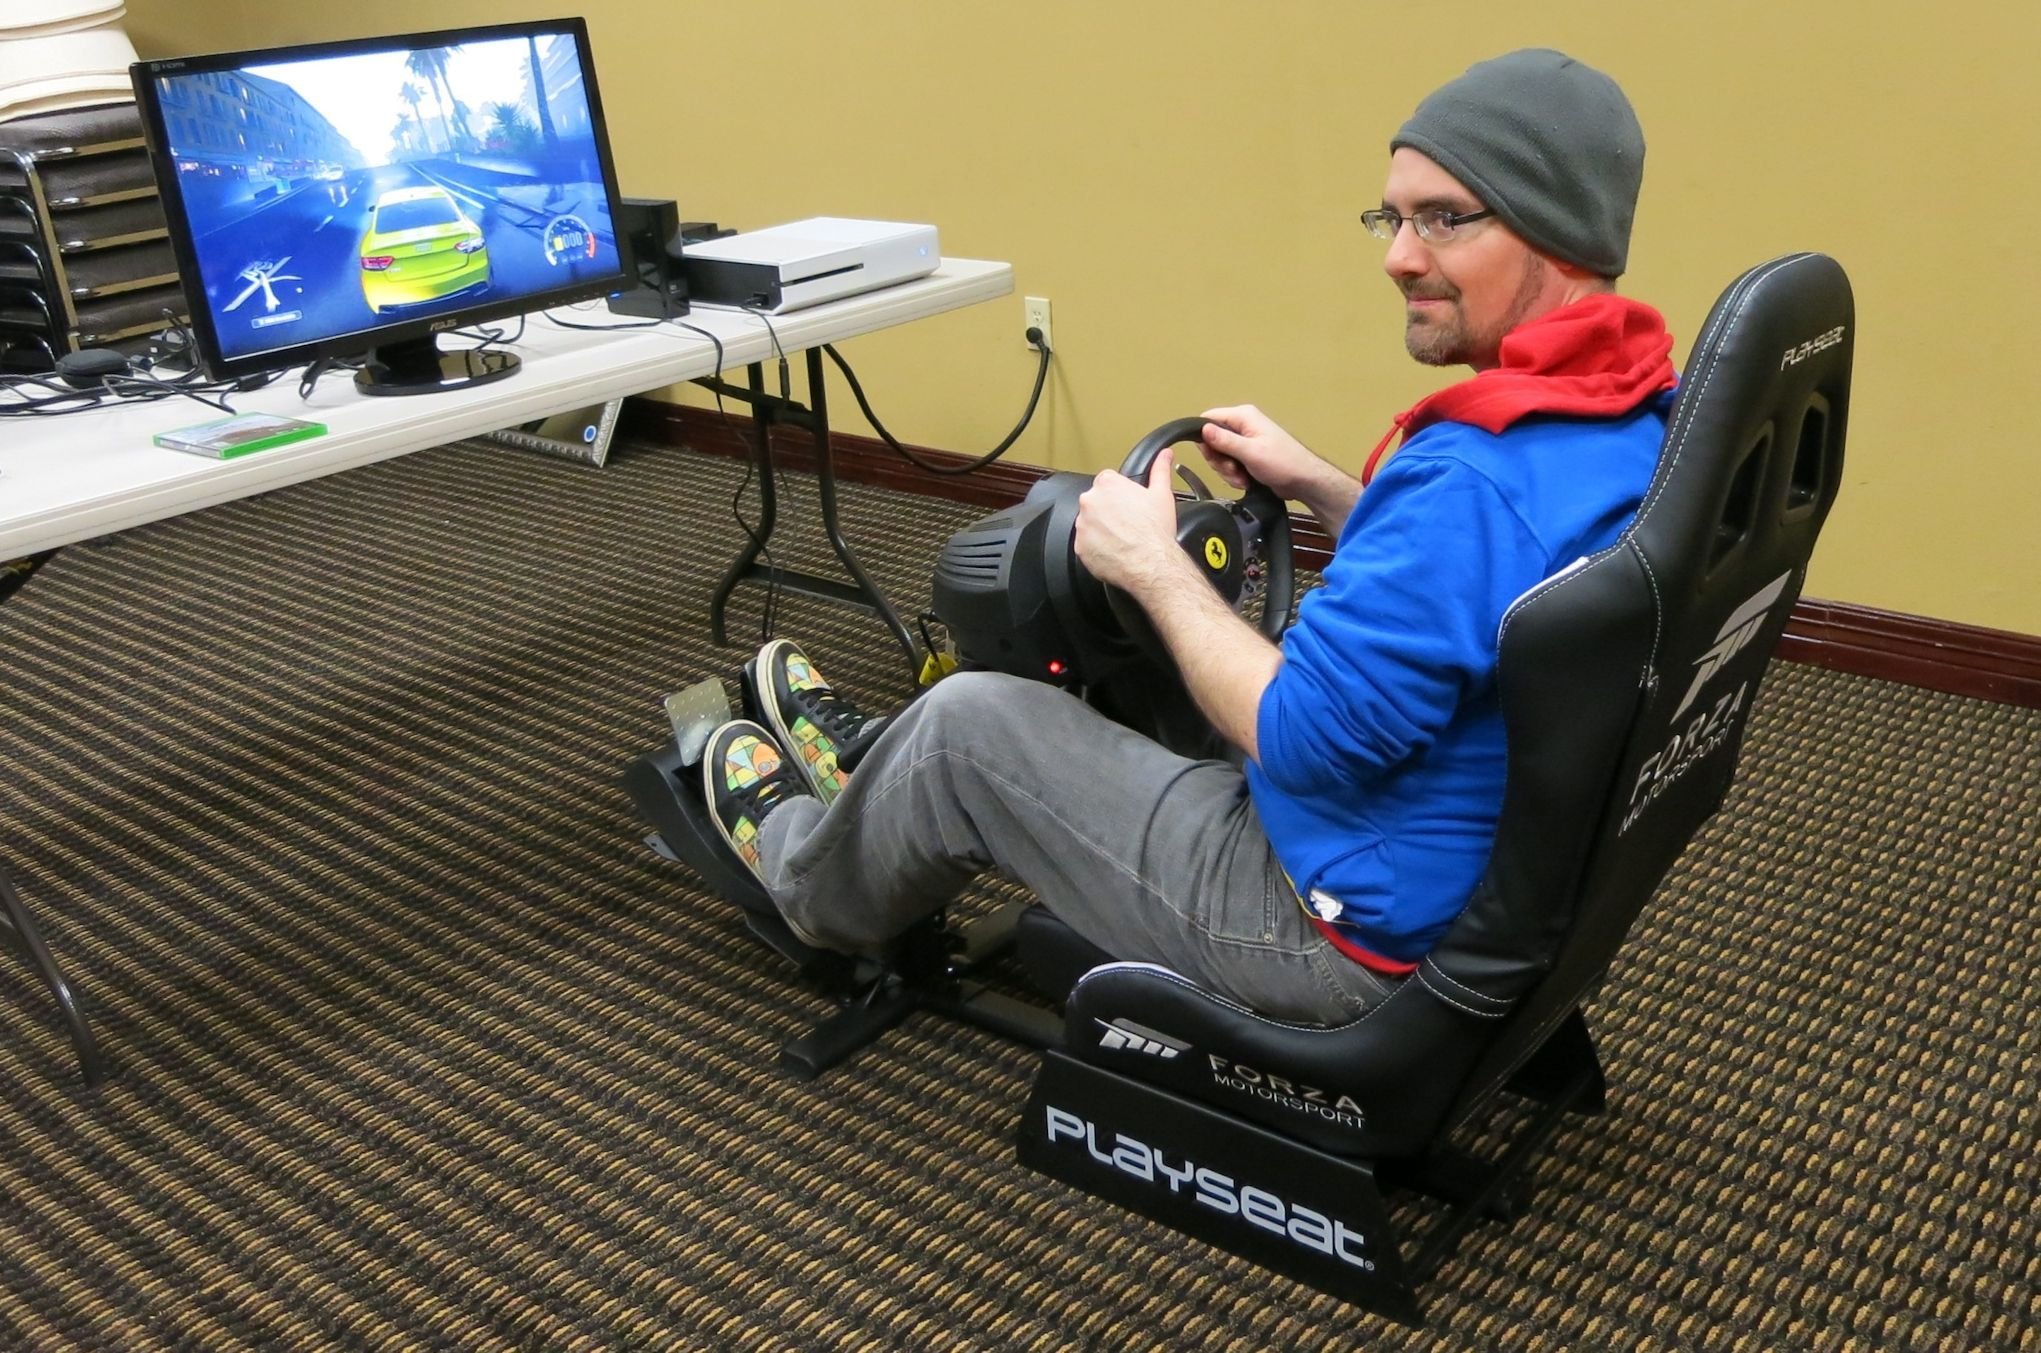 The Playseat Challenge X is more functional, comfortable and